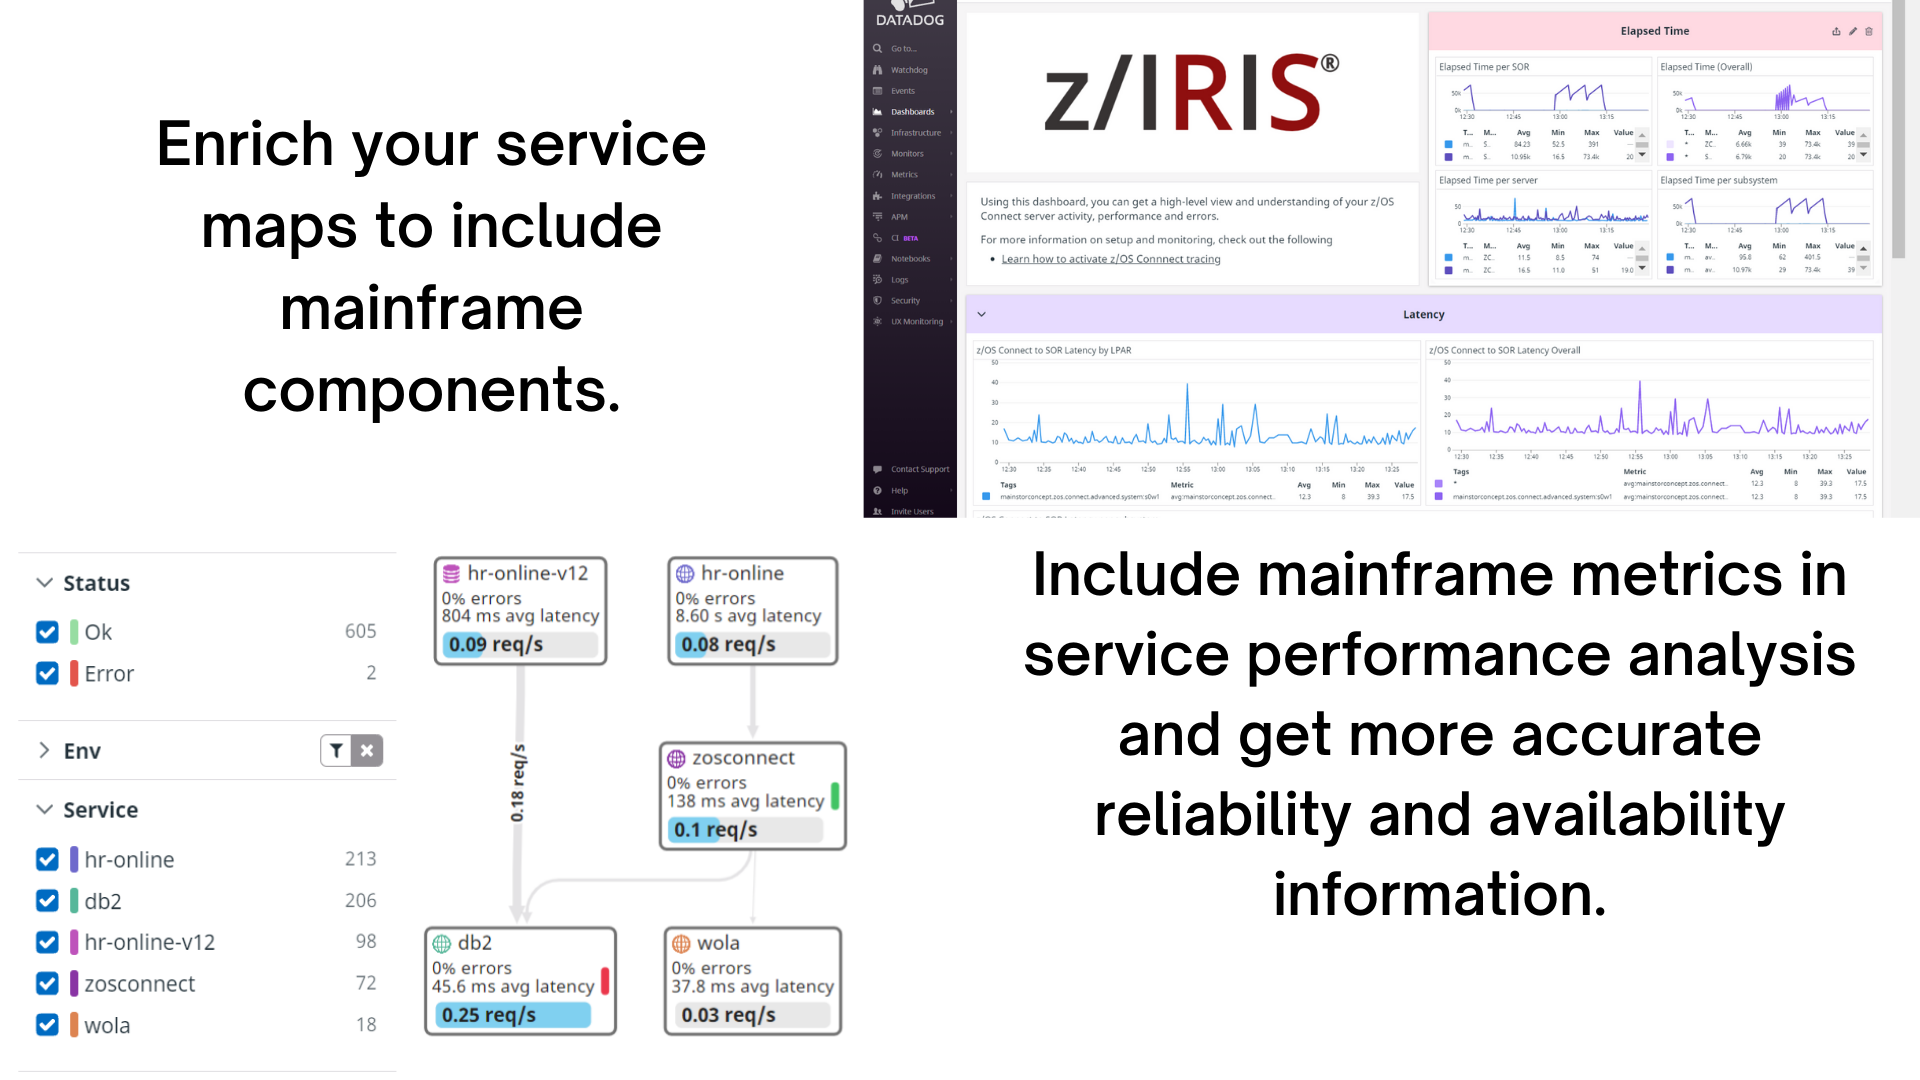 Enrich service maps and incllude mainframe metrics